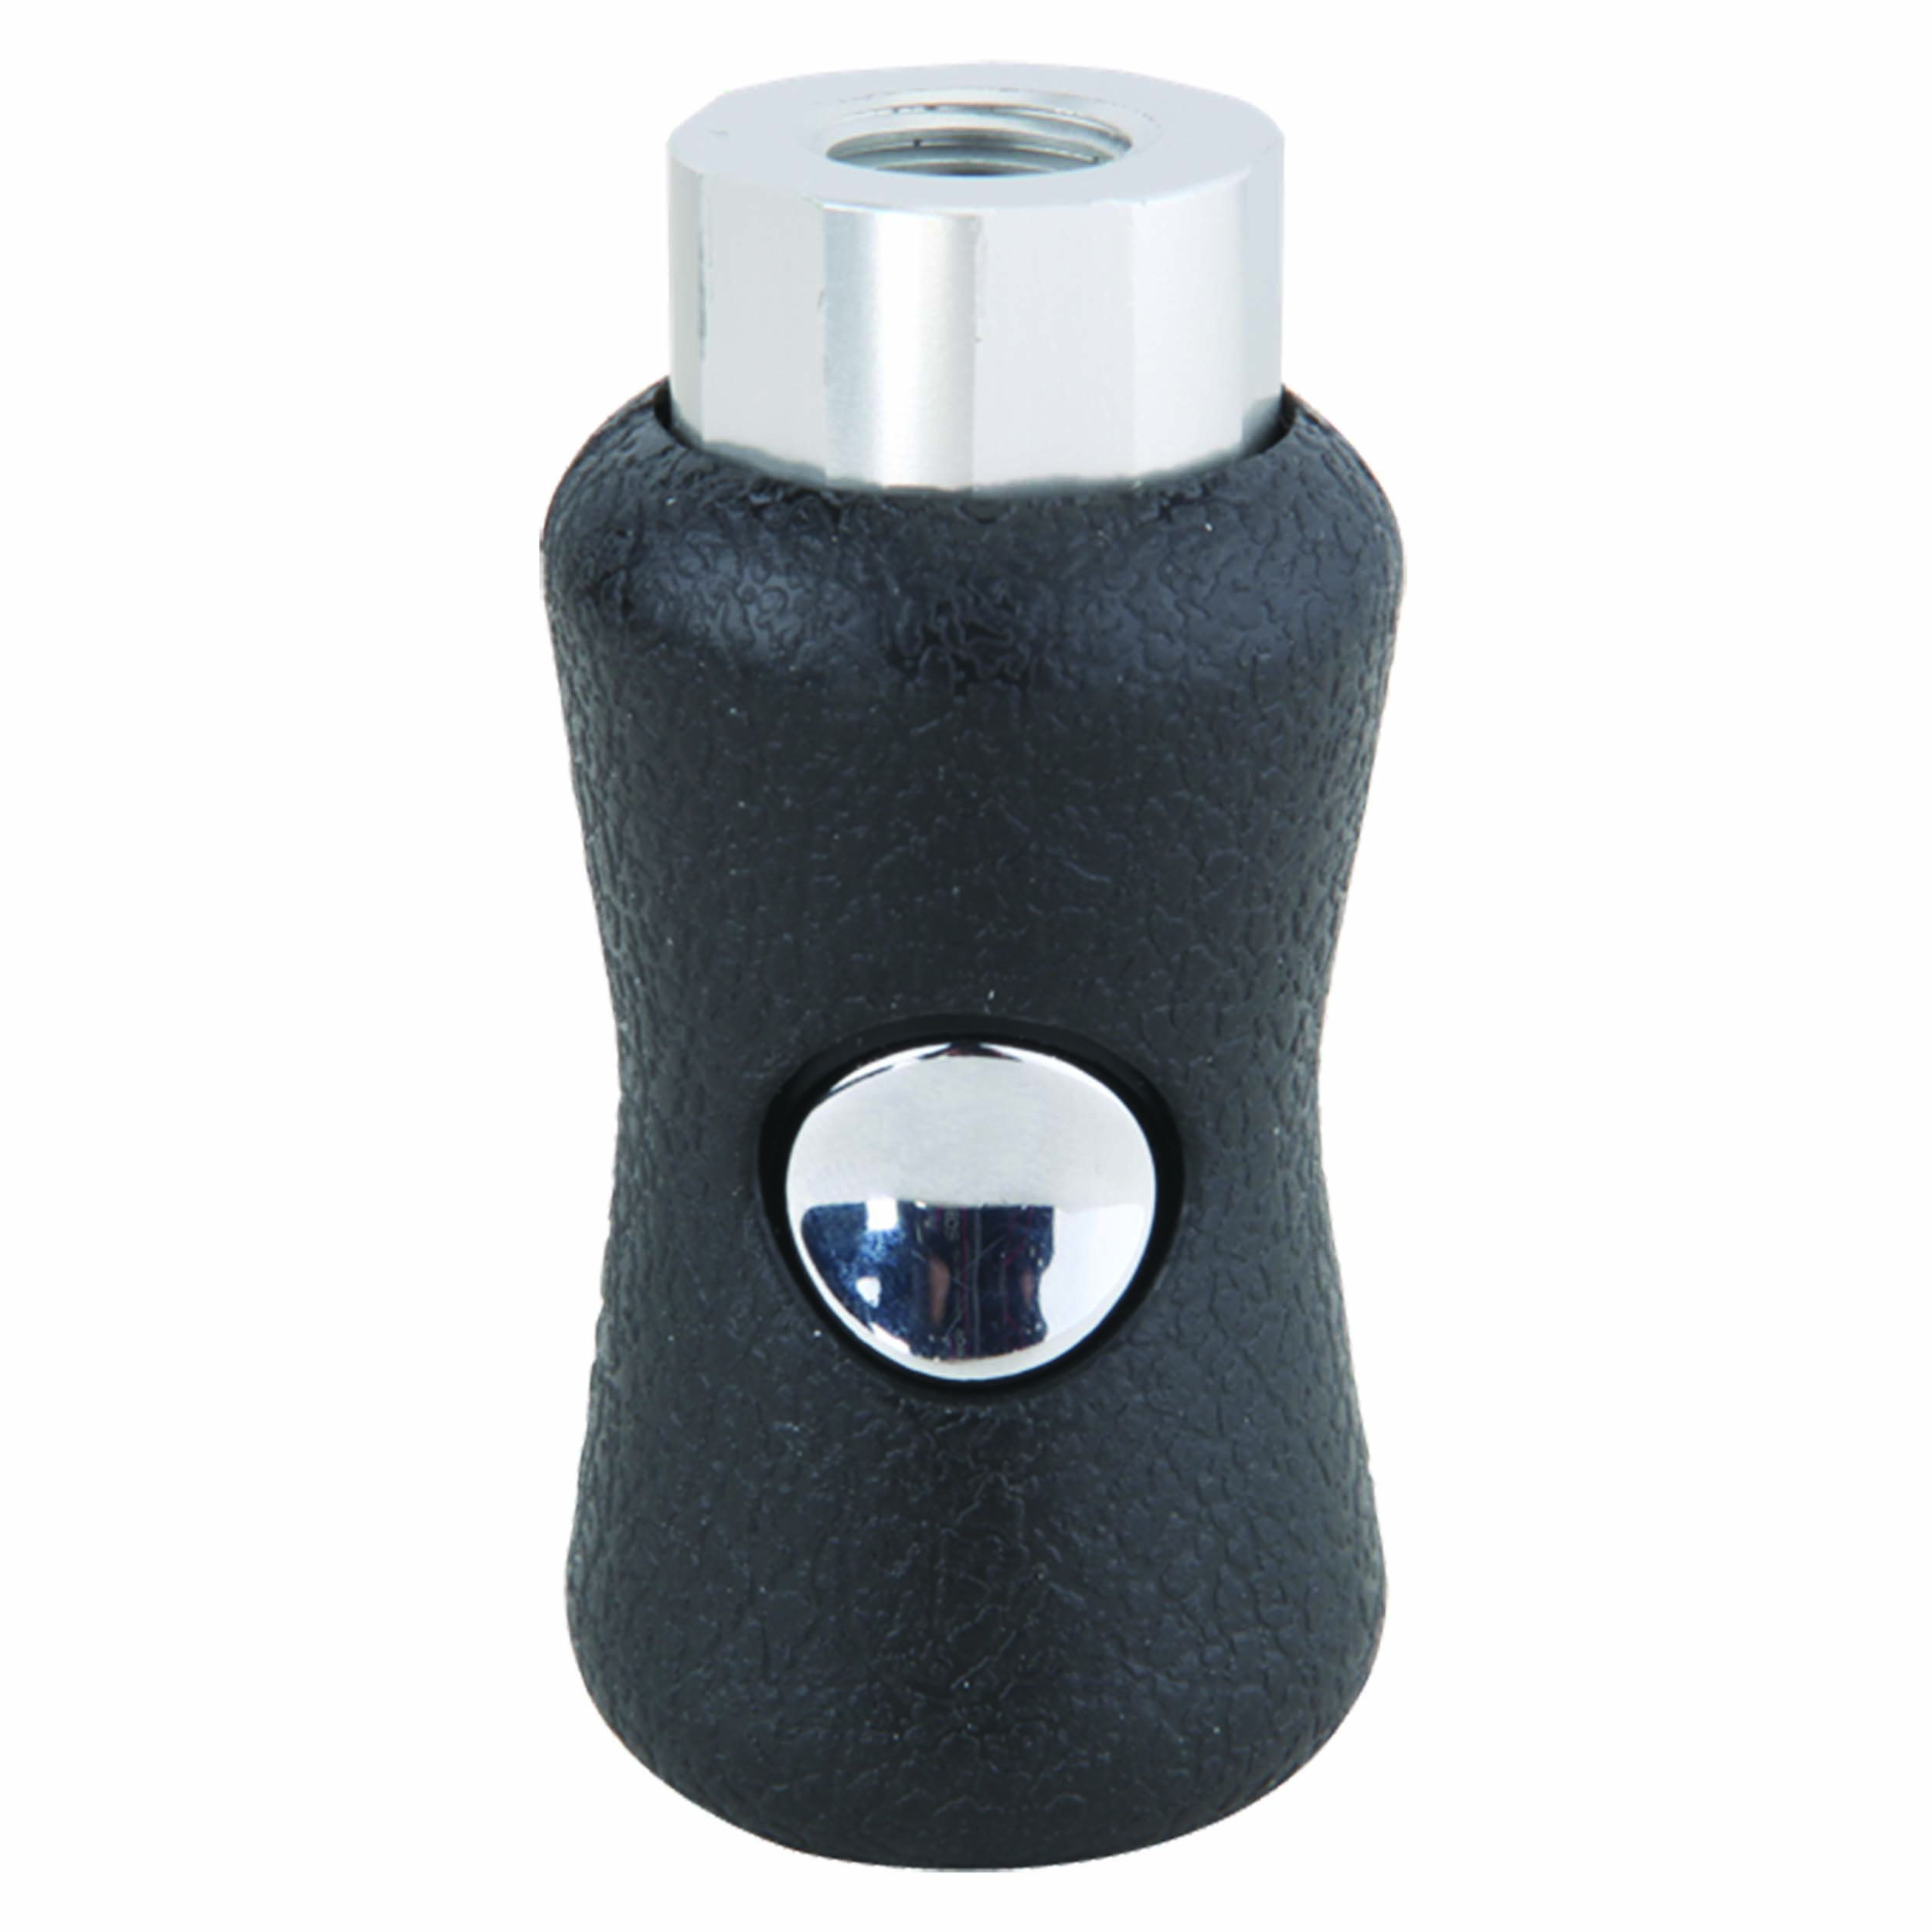 1/4-inch Push-button Air Coupler With Female 1/4-inch Npt